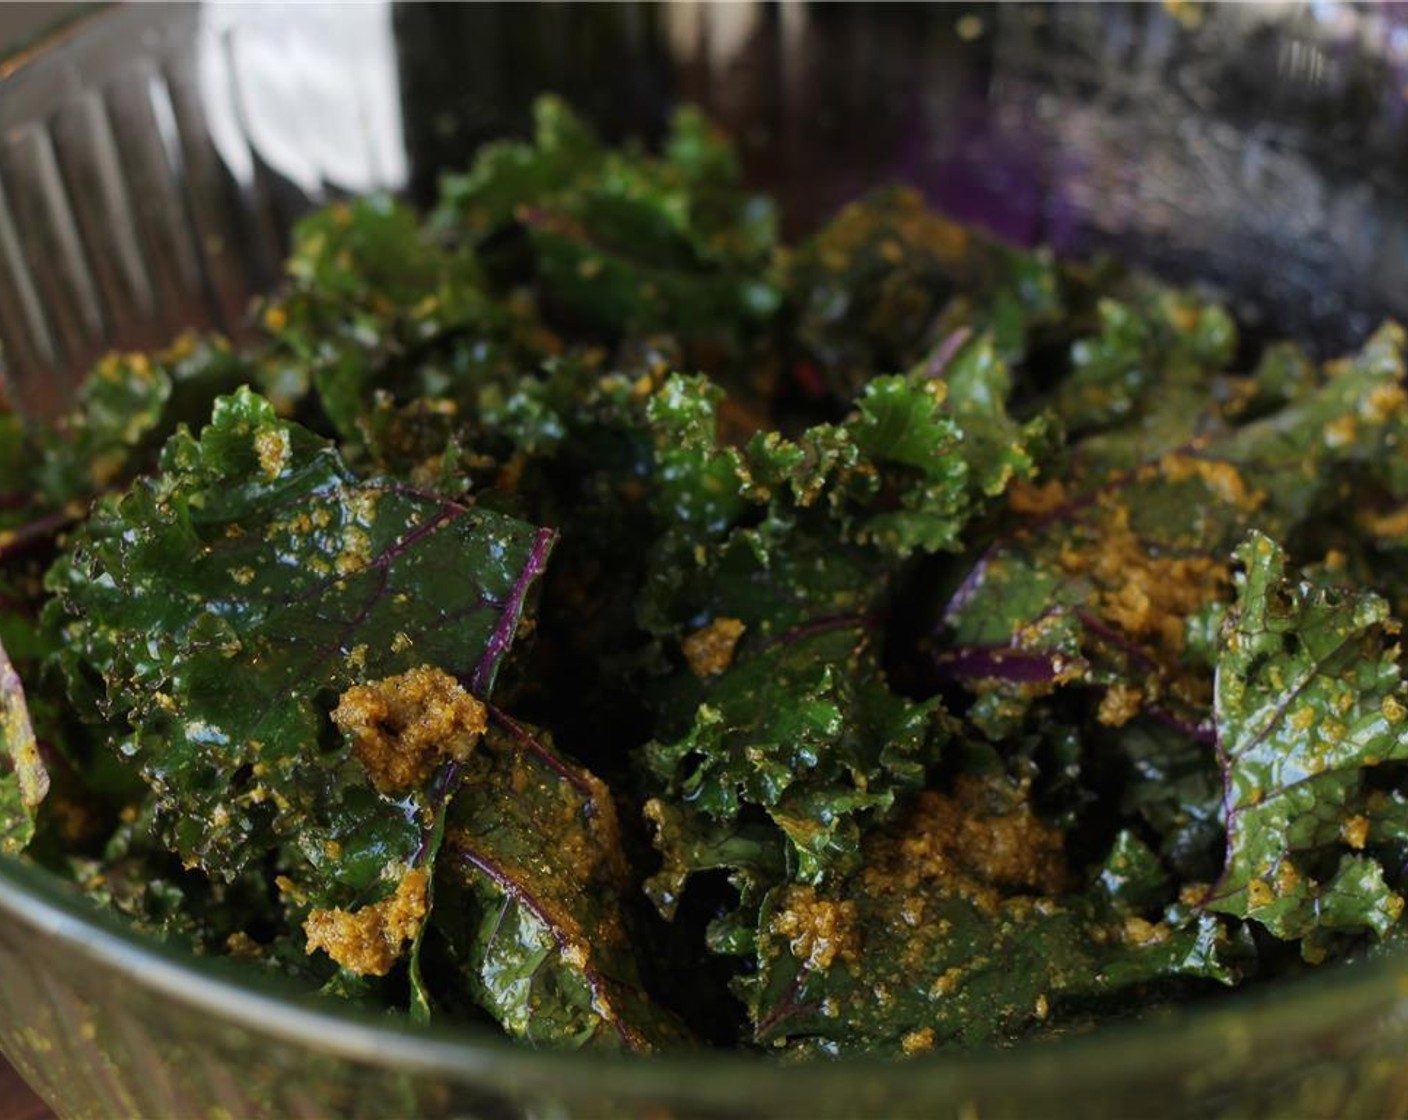 step 4 Clean and trim the Kale (1 bunch). Toss kale in dressing until thoroughly coated.